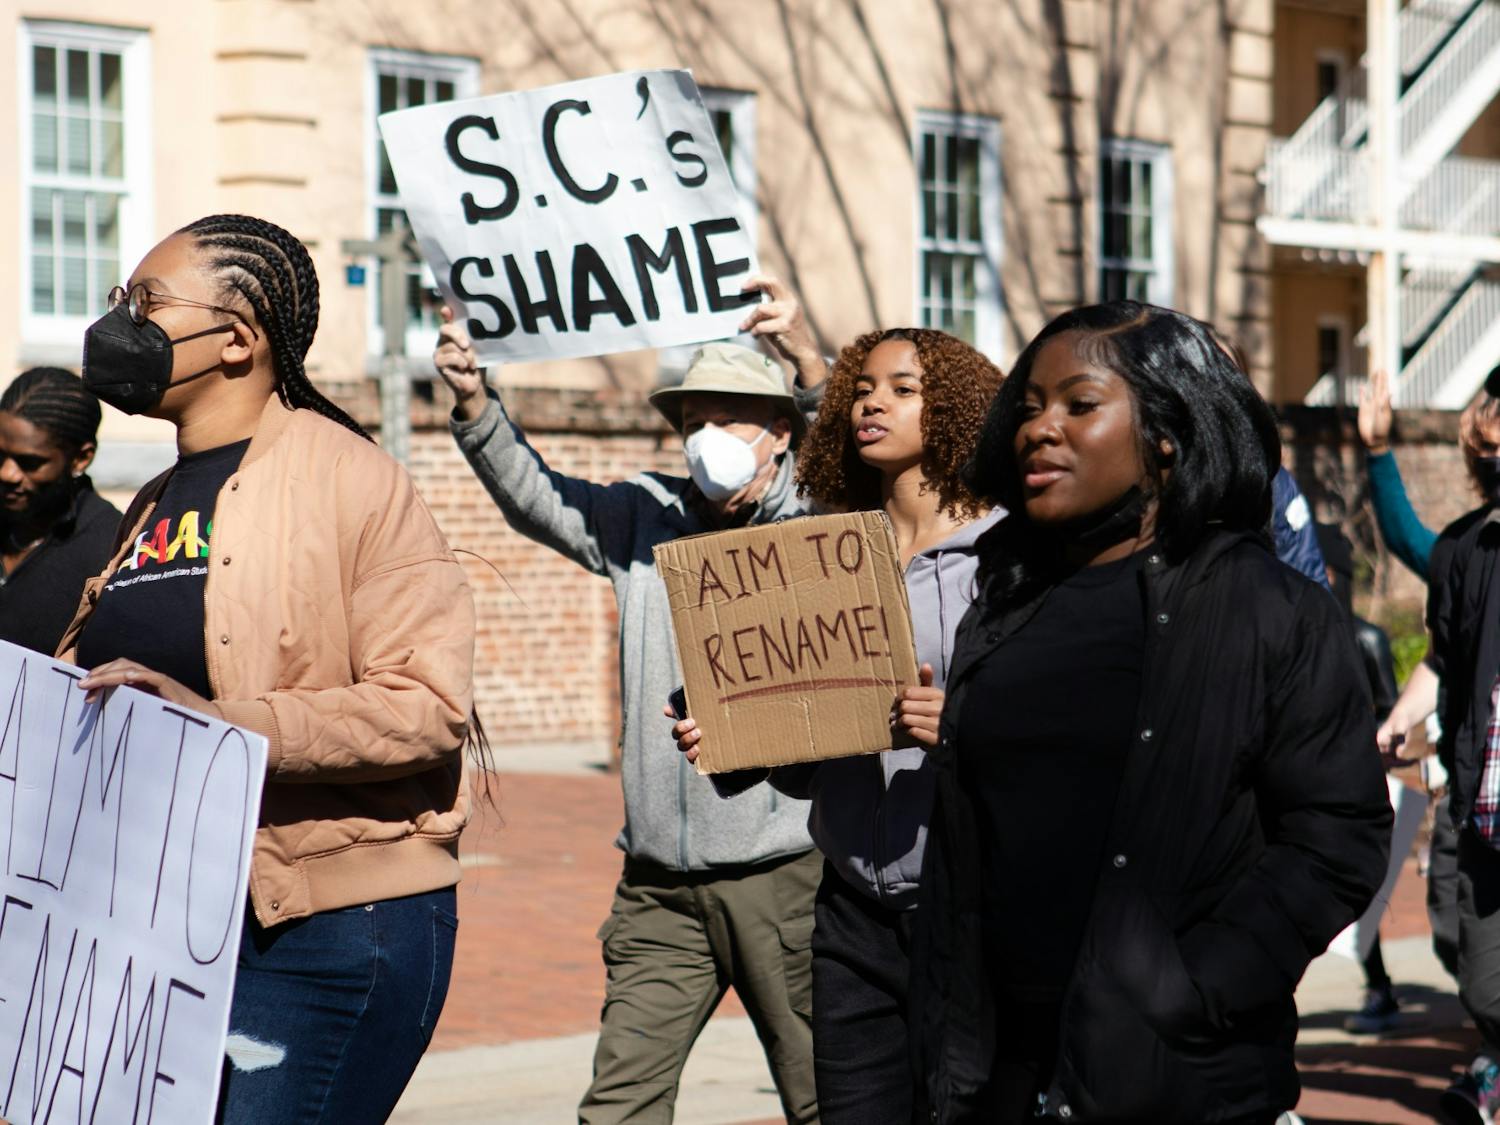 Led by members of the USC NAACP chapter, students, faculty and members of the USC community began their walk to the statehouse. With roads being blocked off by USCPD, the protesters made their way to the statehouse on Feb. 5, 2022.